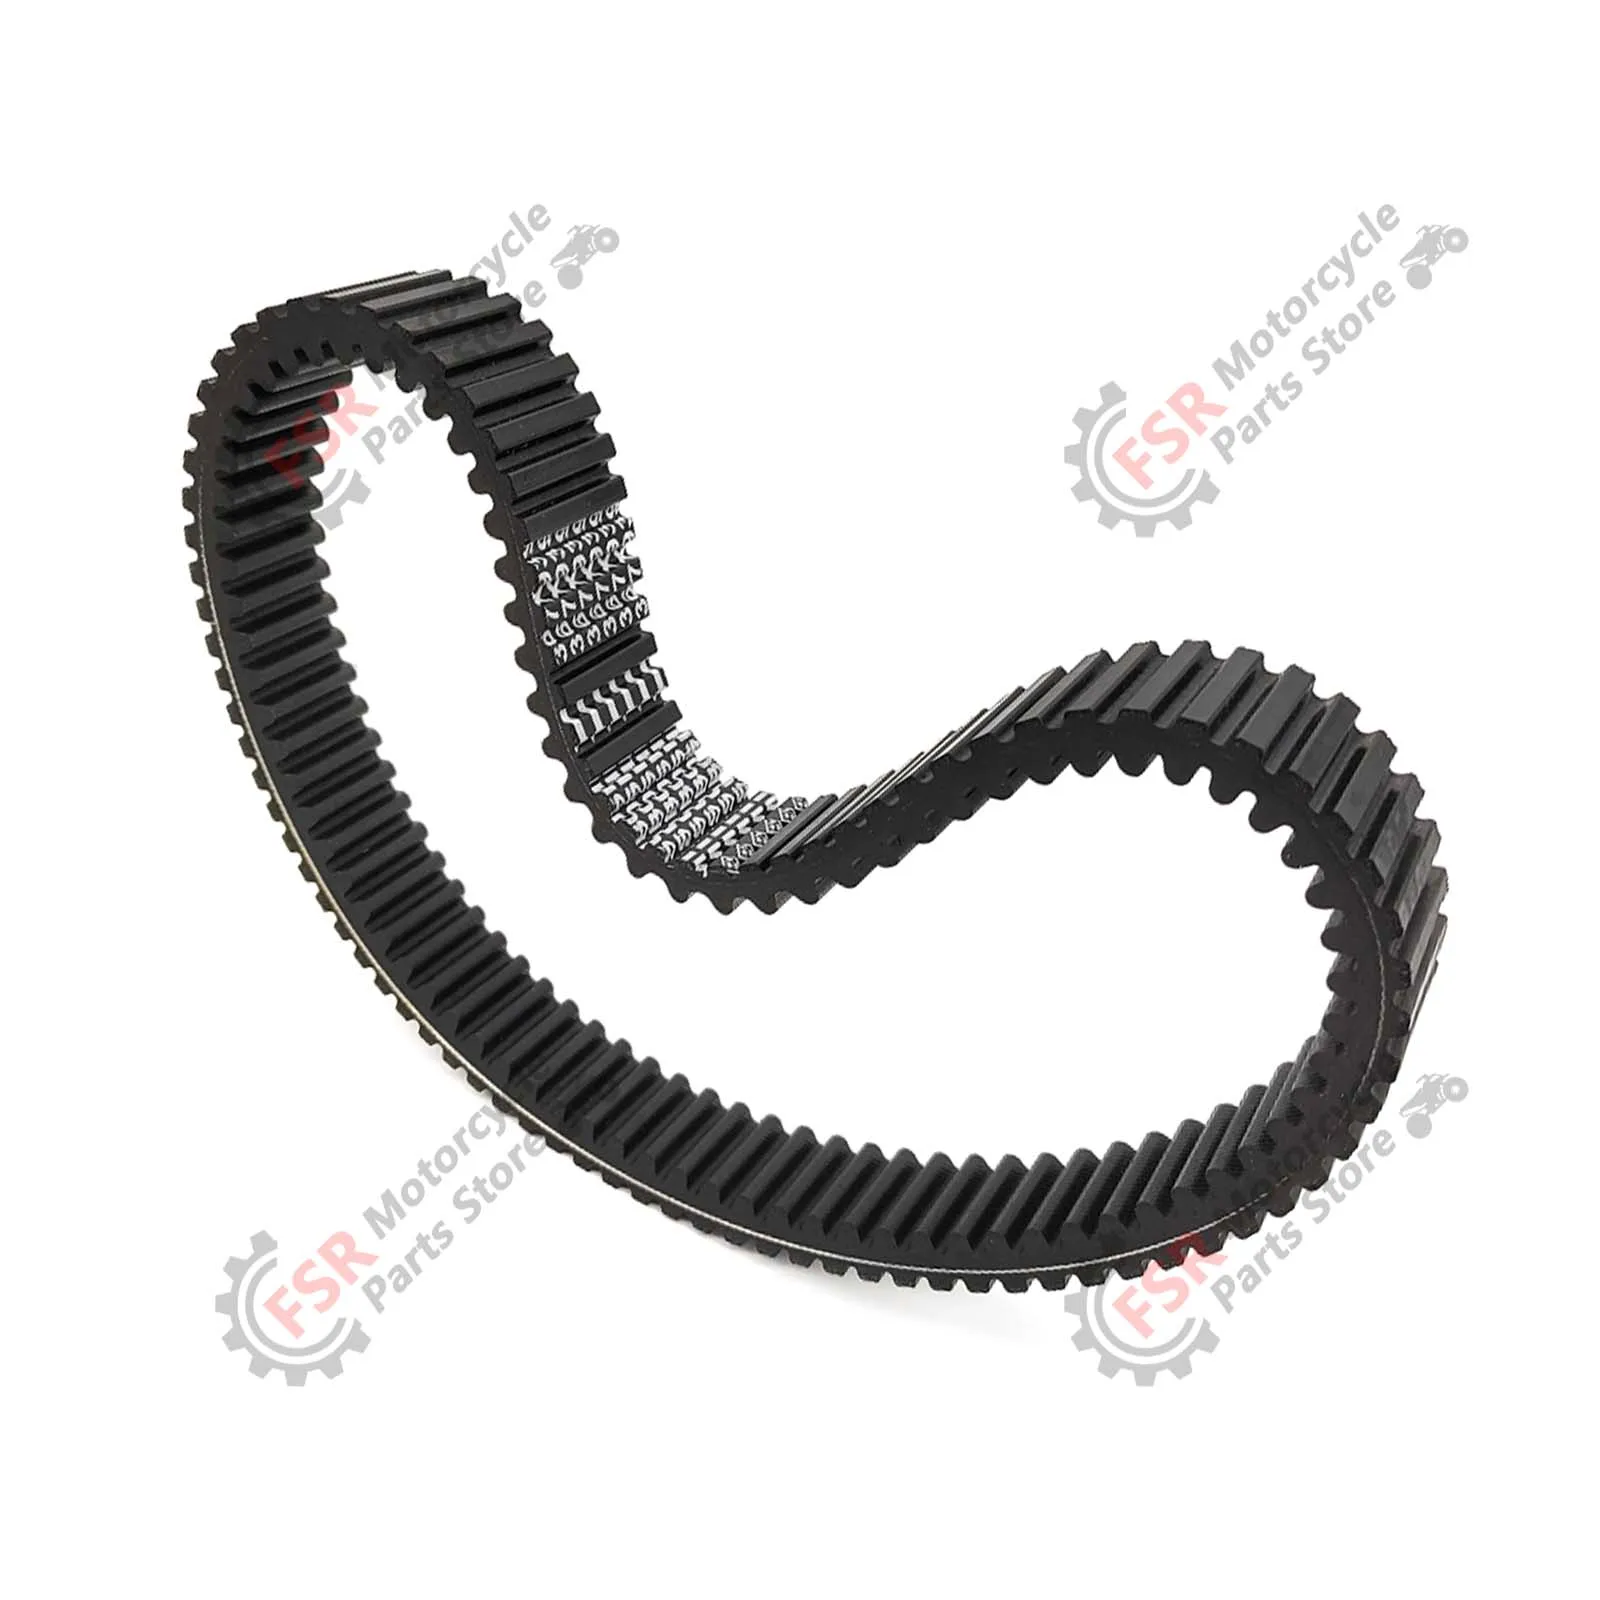 Transmission belt suitable for Dongfeng 500 ATV, farmer's vehicle, motorcycle 0180-055000-0001 Made in China